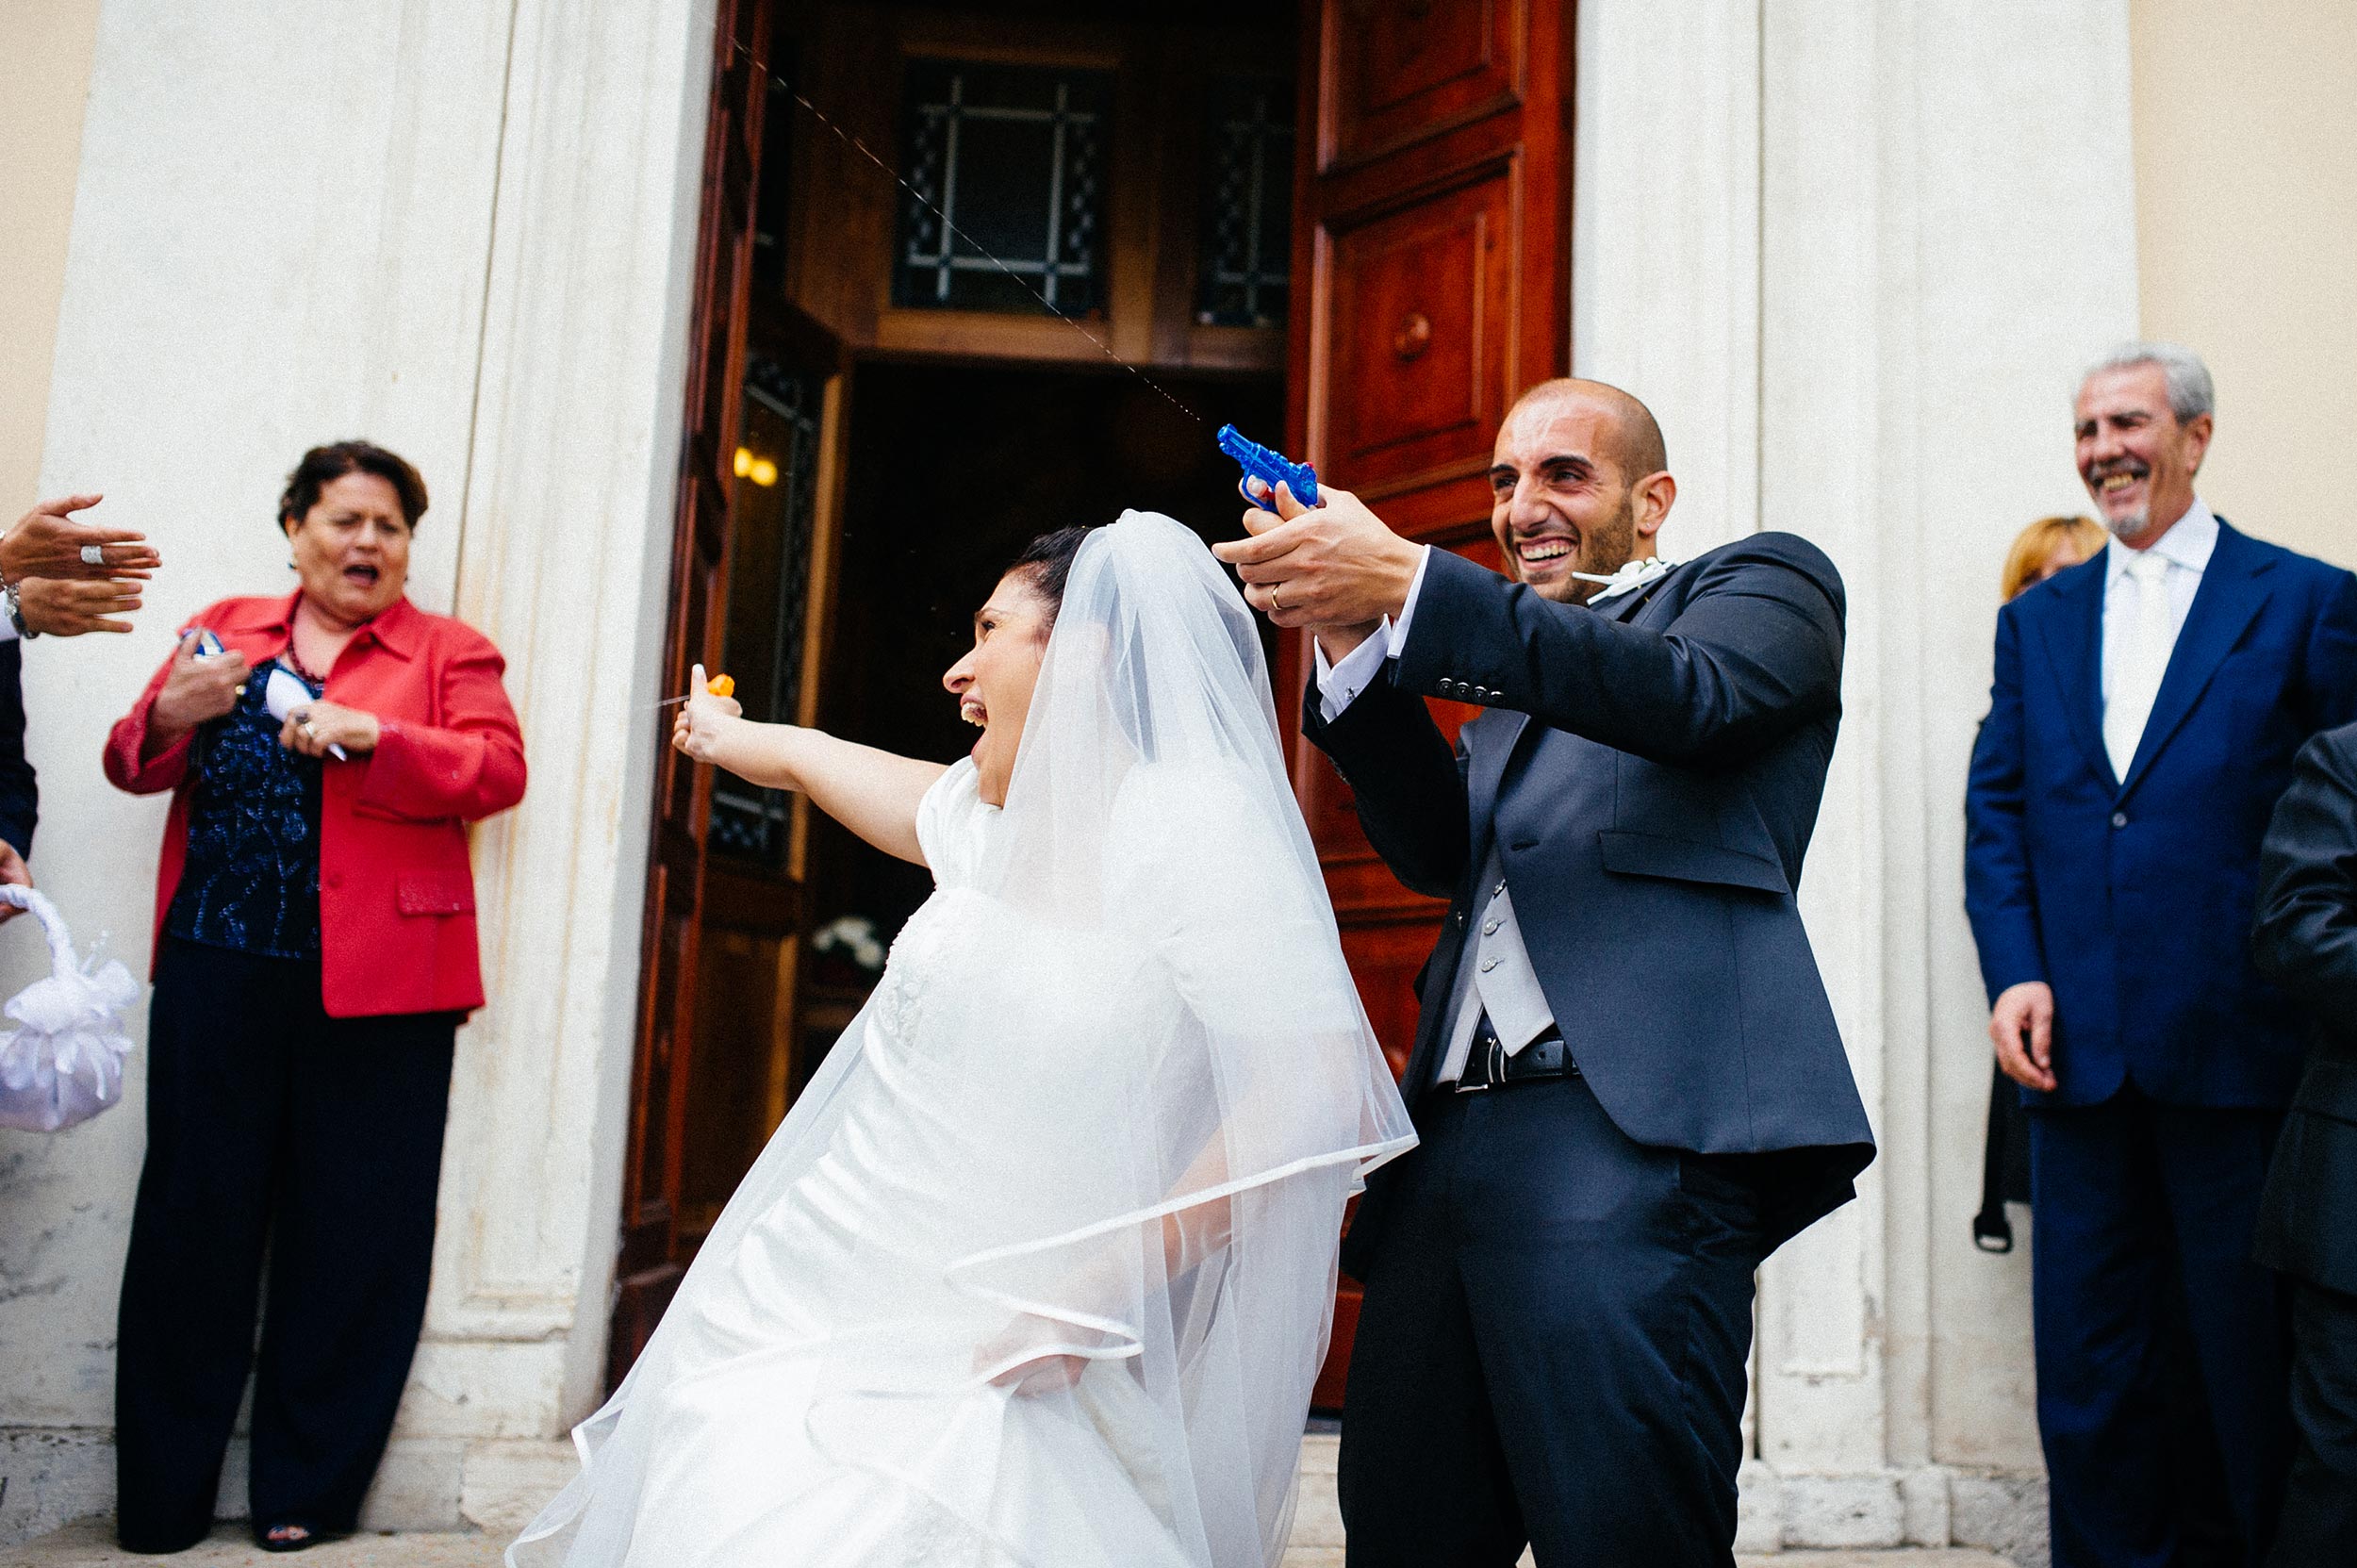 bride-and-groom-outside-the-church-shoot-guests-with-water-guns.jpg